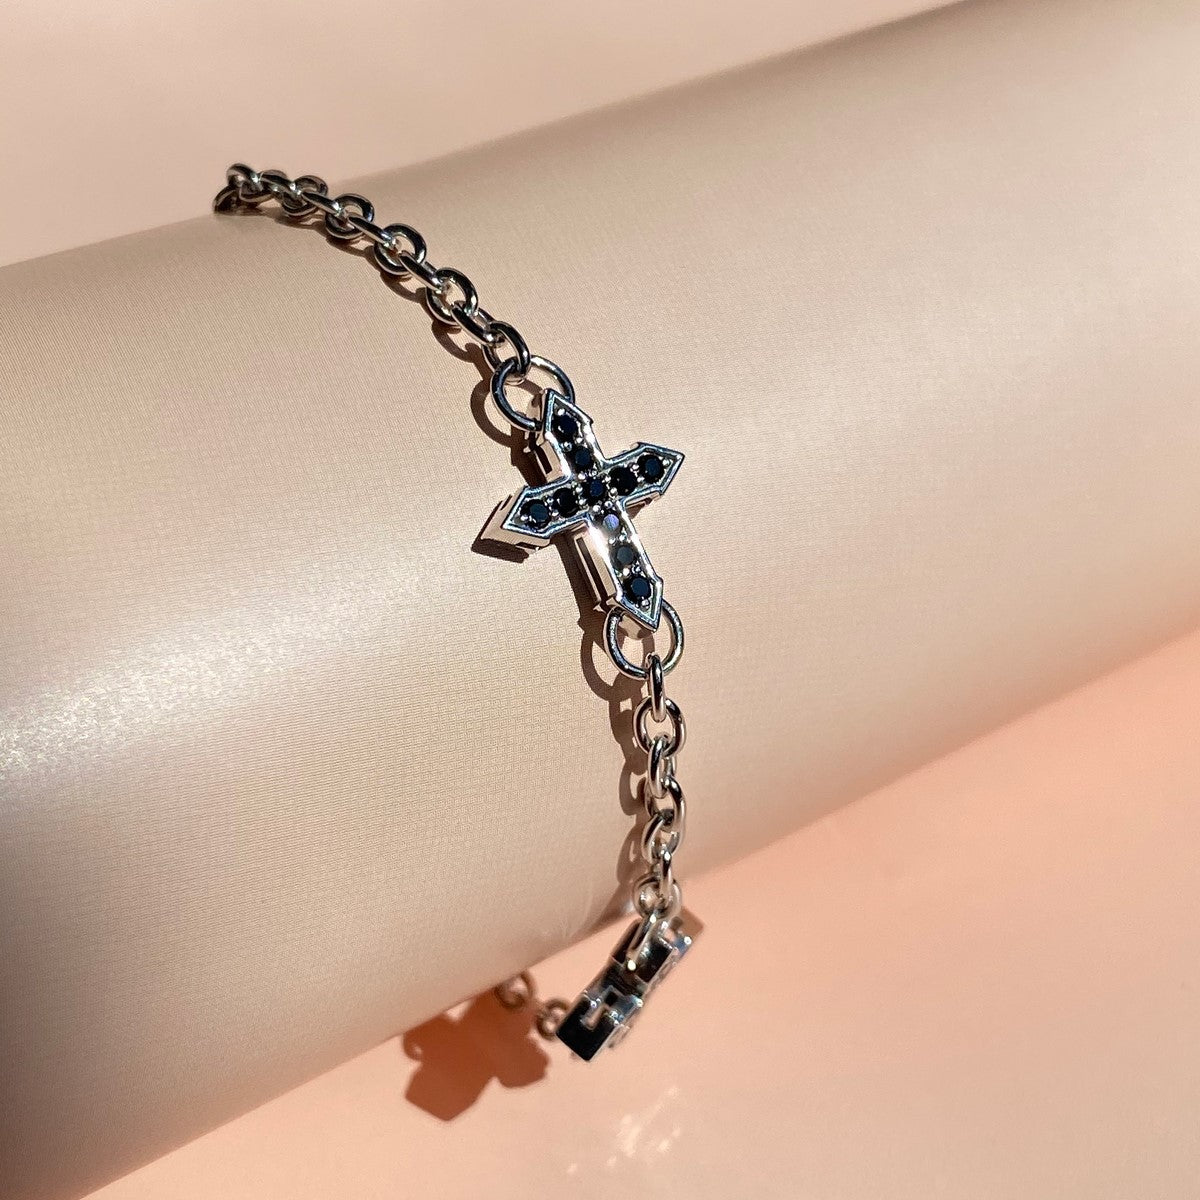 CHAIN BRACELET "TWO CROSSES "GLOW" WITH BLACK SPINEL / SILVER